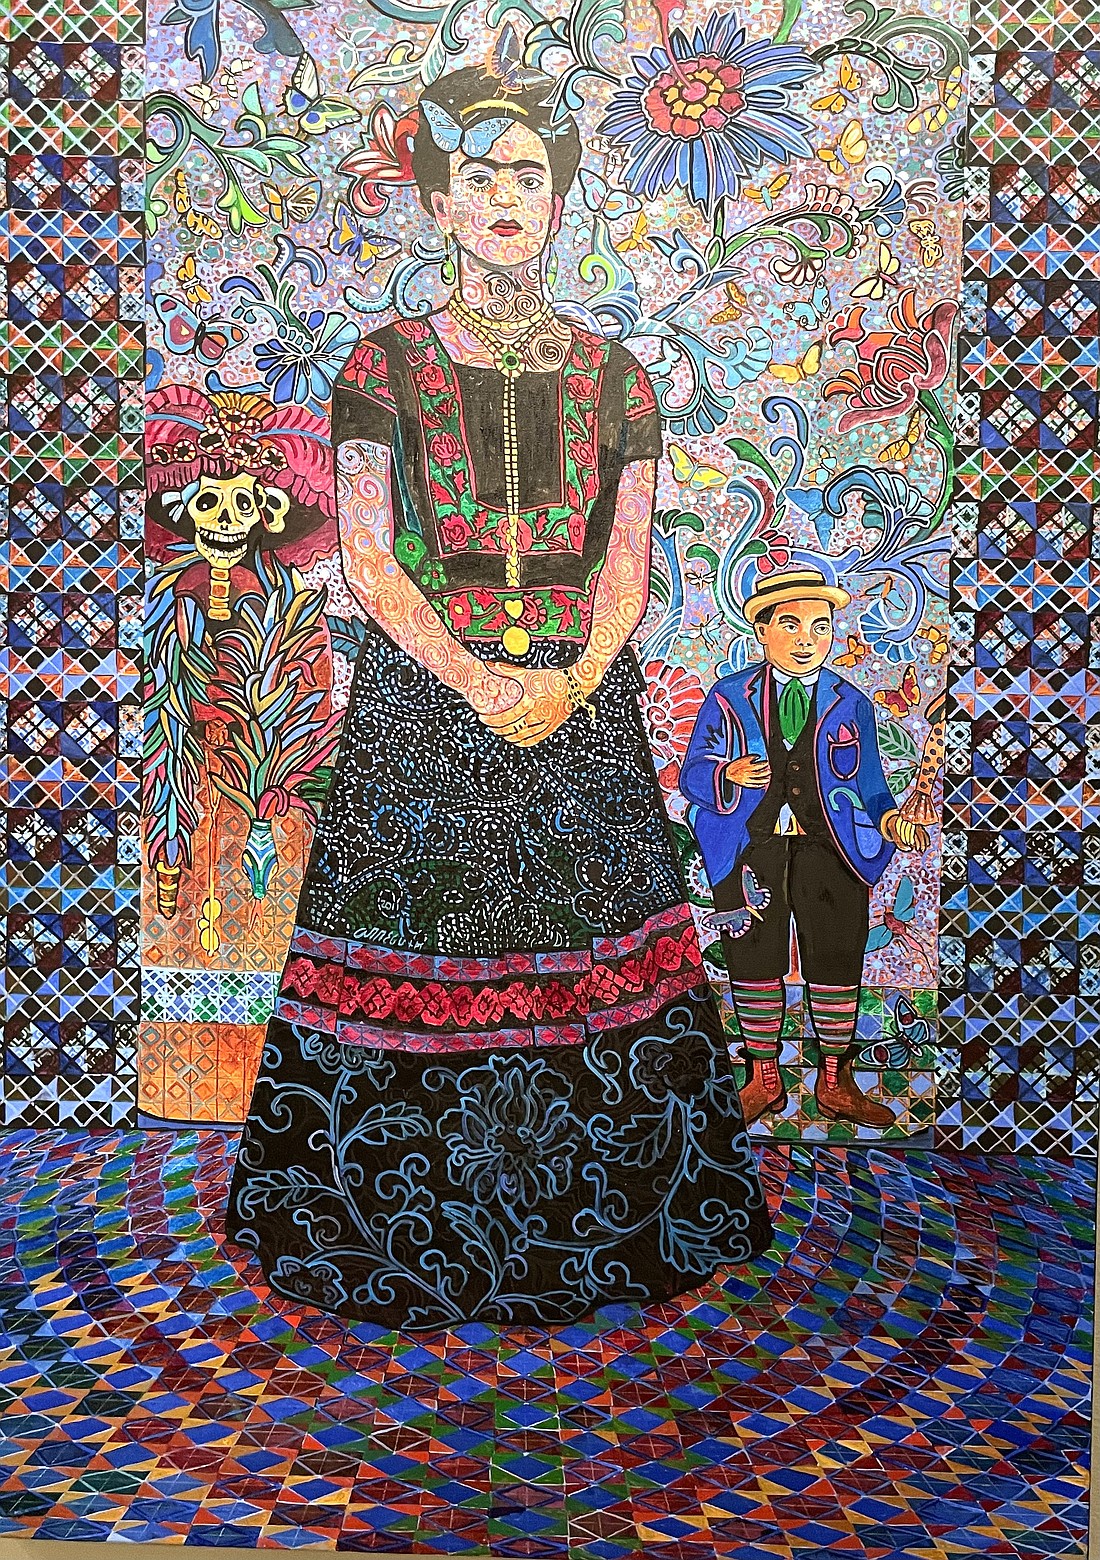 “La Alameda” is part of the exhibit “Arreguín: Painter from the New World” currently showing at the Museum of Northwest Art in La Conner. Art critic and exhibit curator Matthew Kangas said it's one of as many as 50 paintings Arreguín has created depicting painter Frida Kahlo.